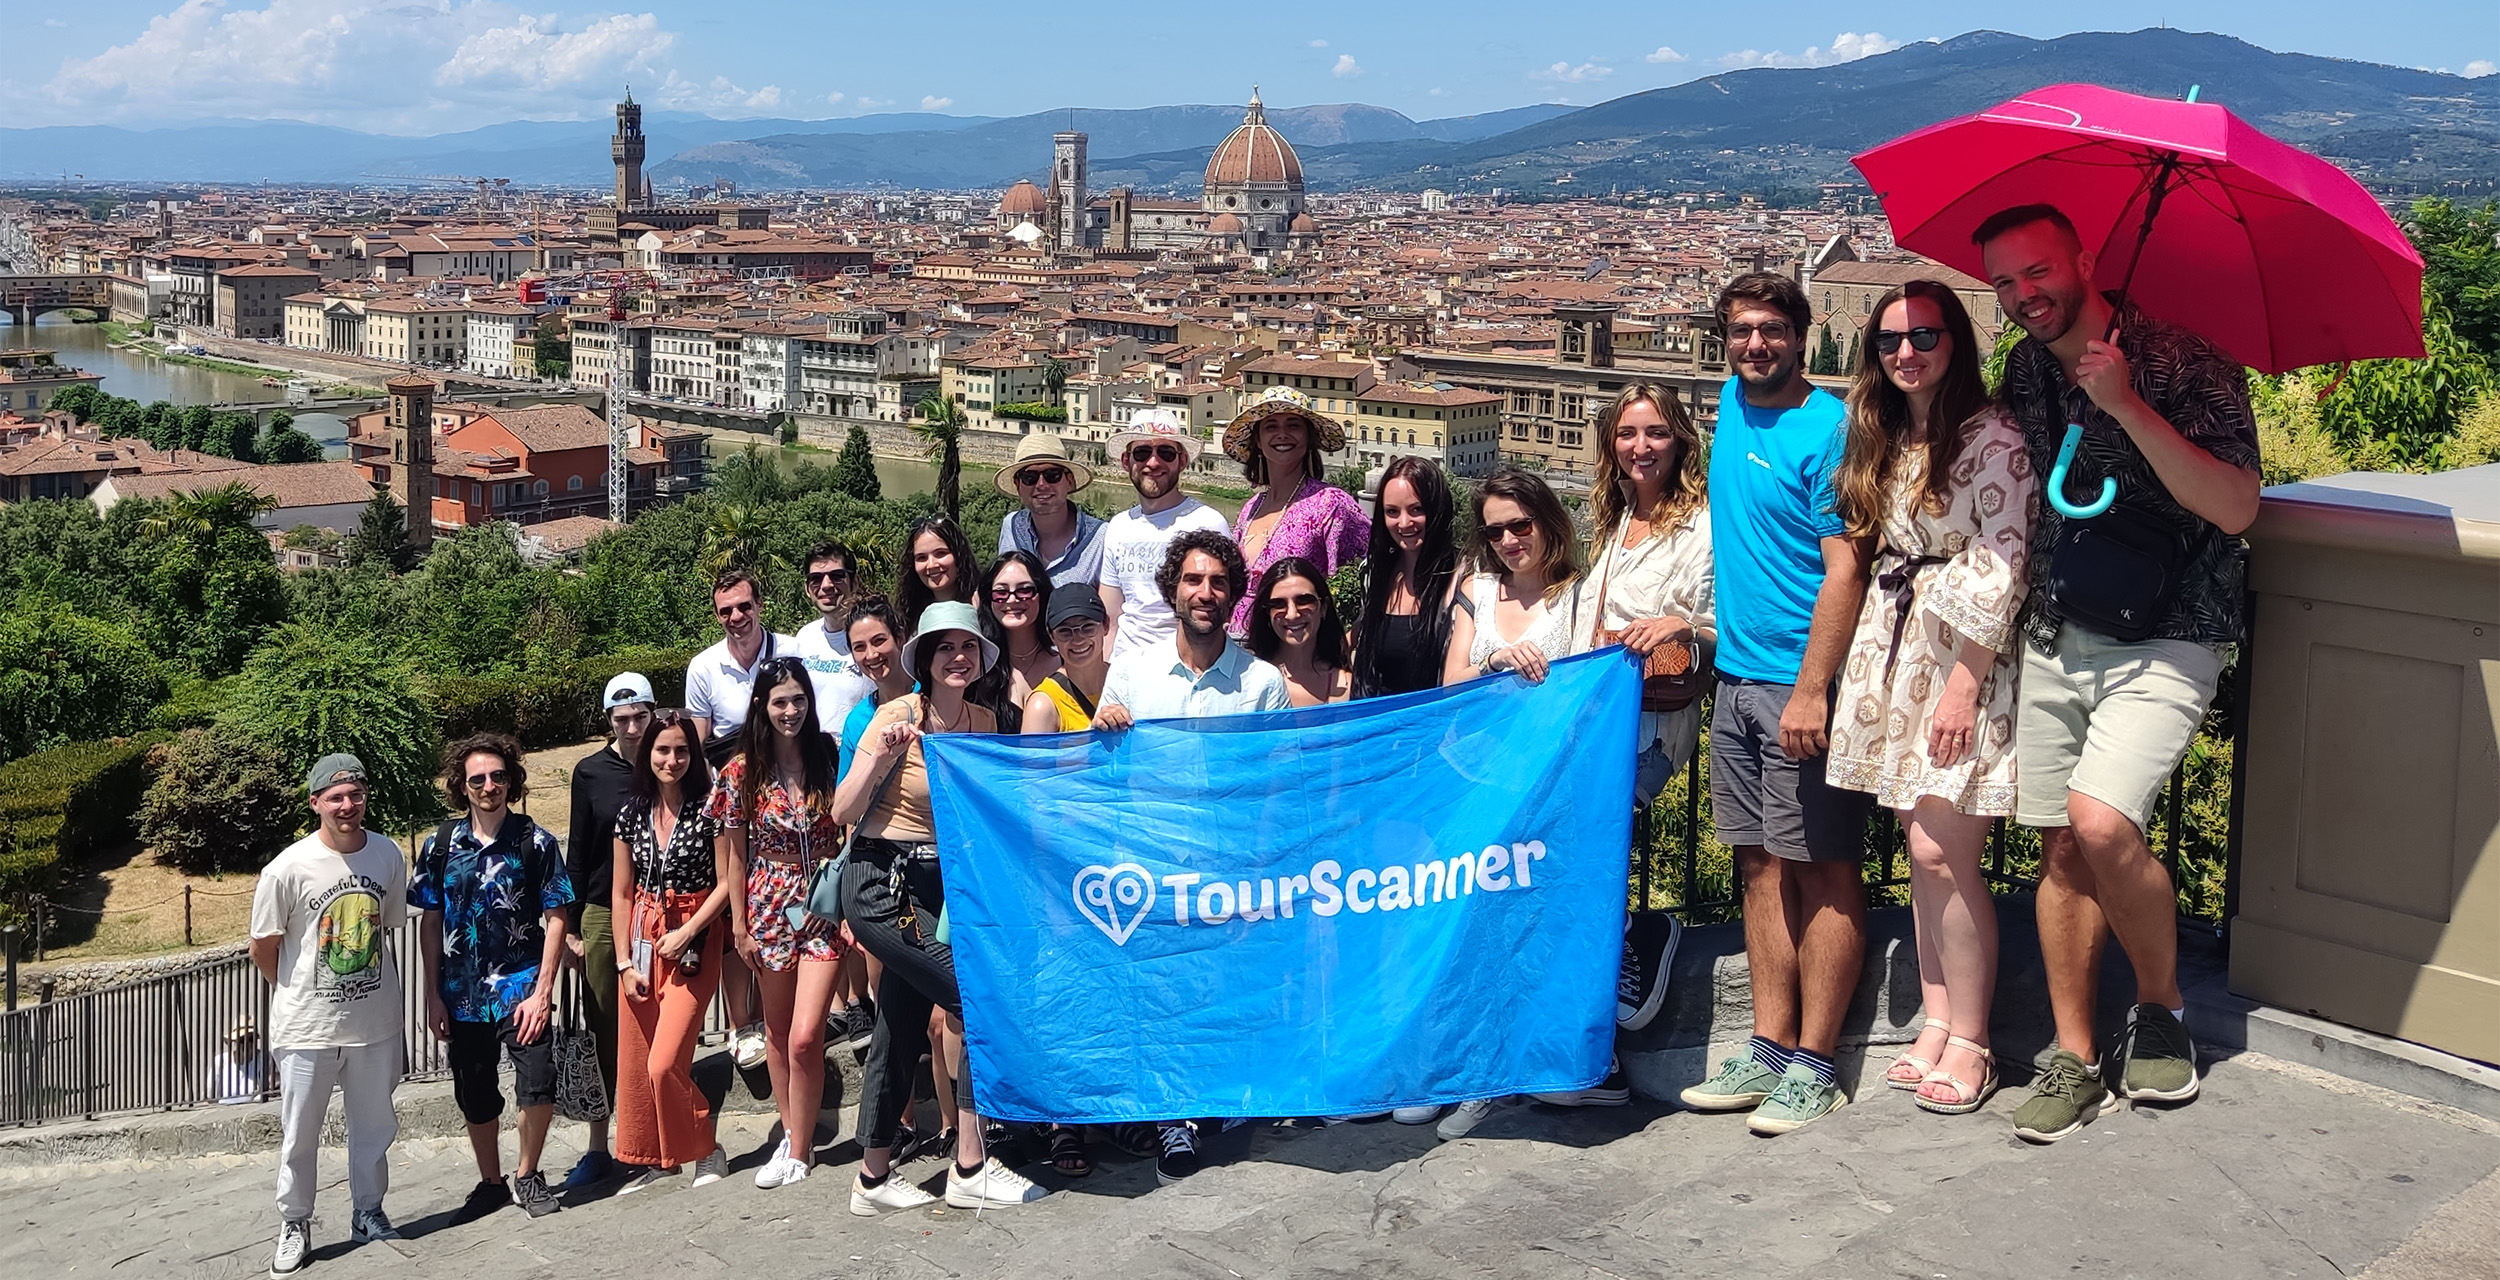 Tourscanner's team in Italy